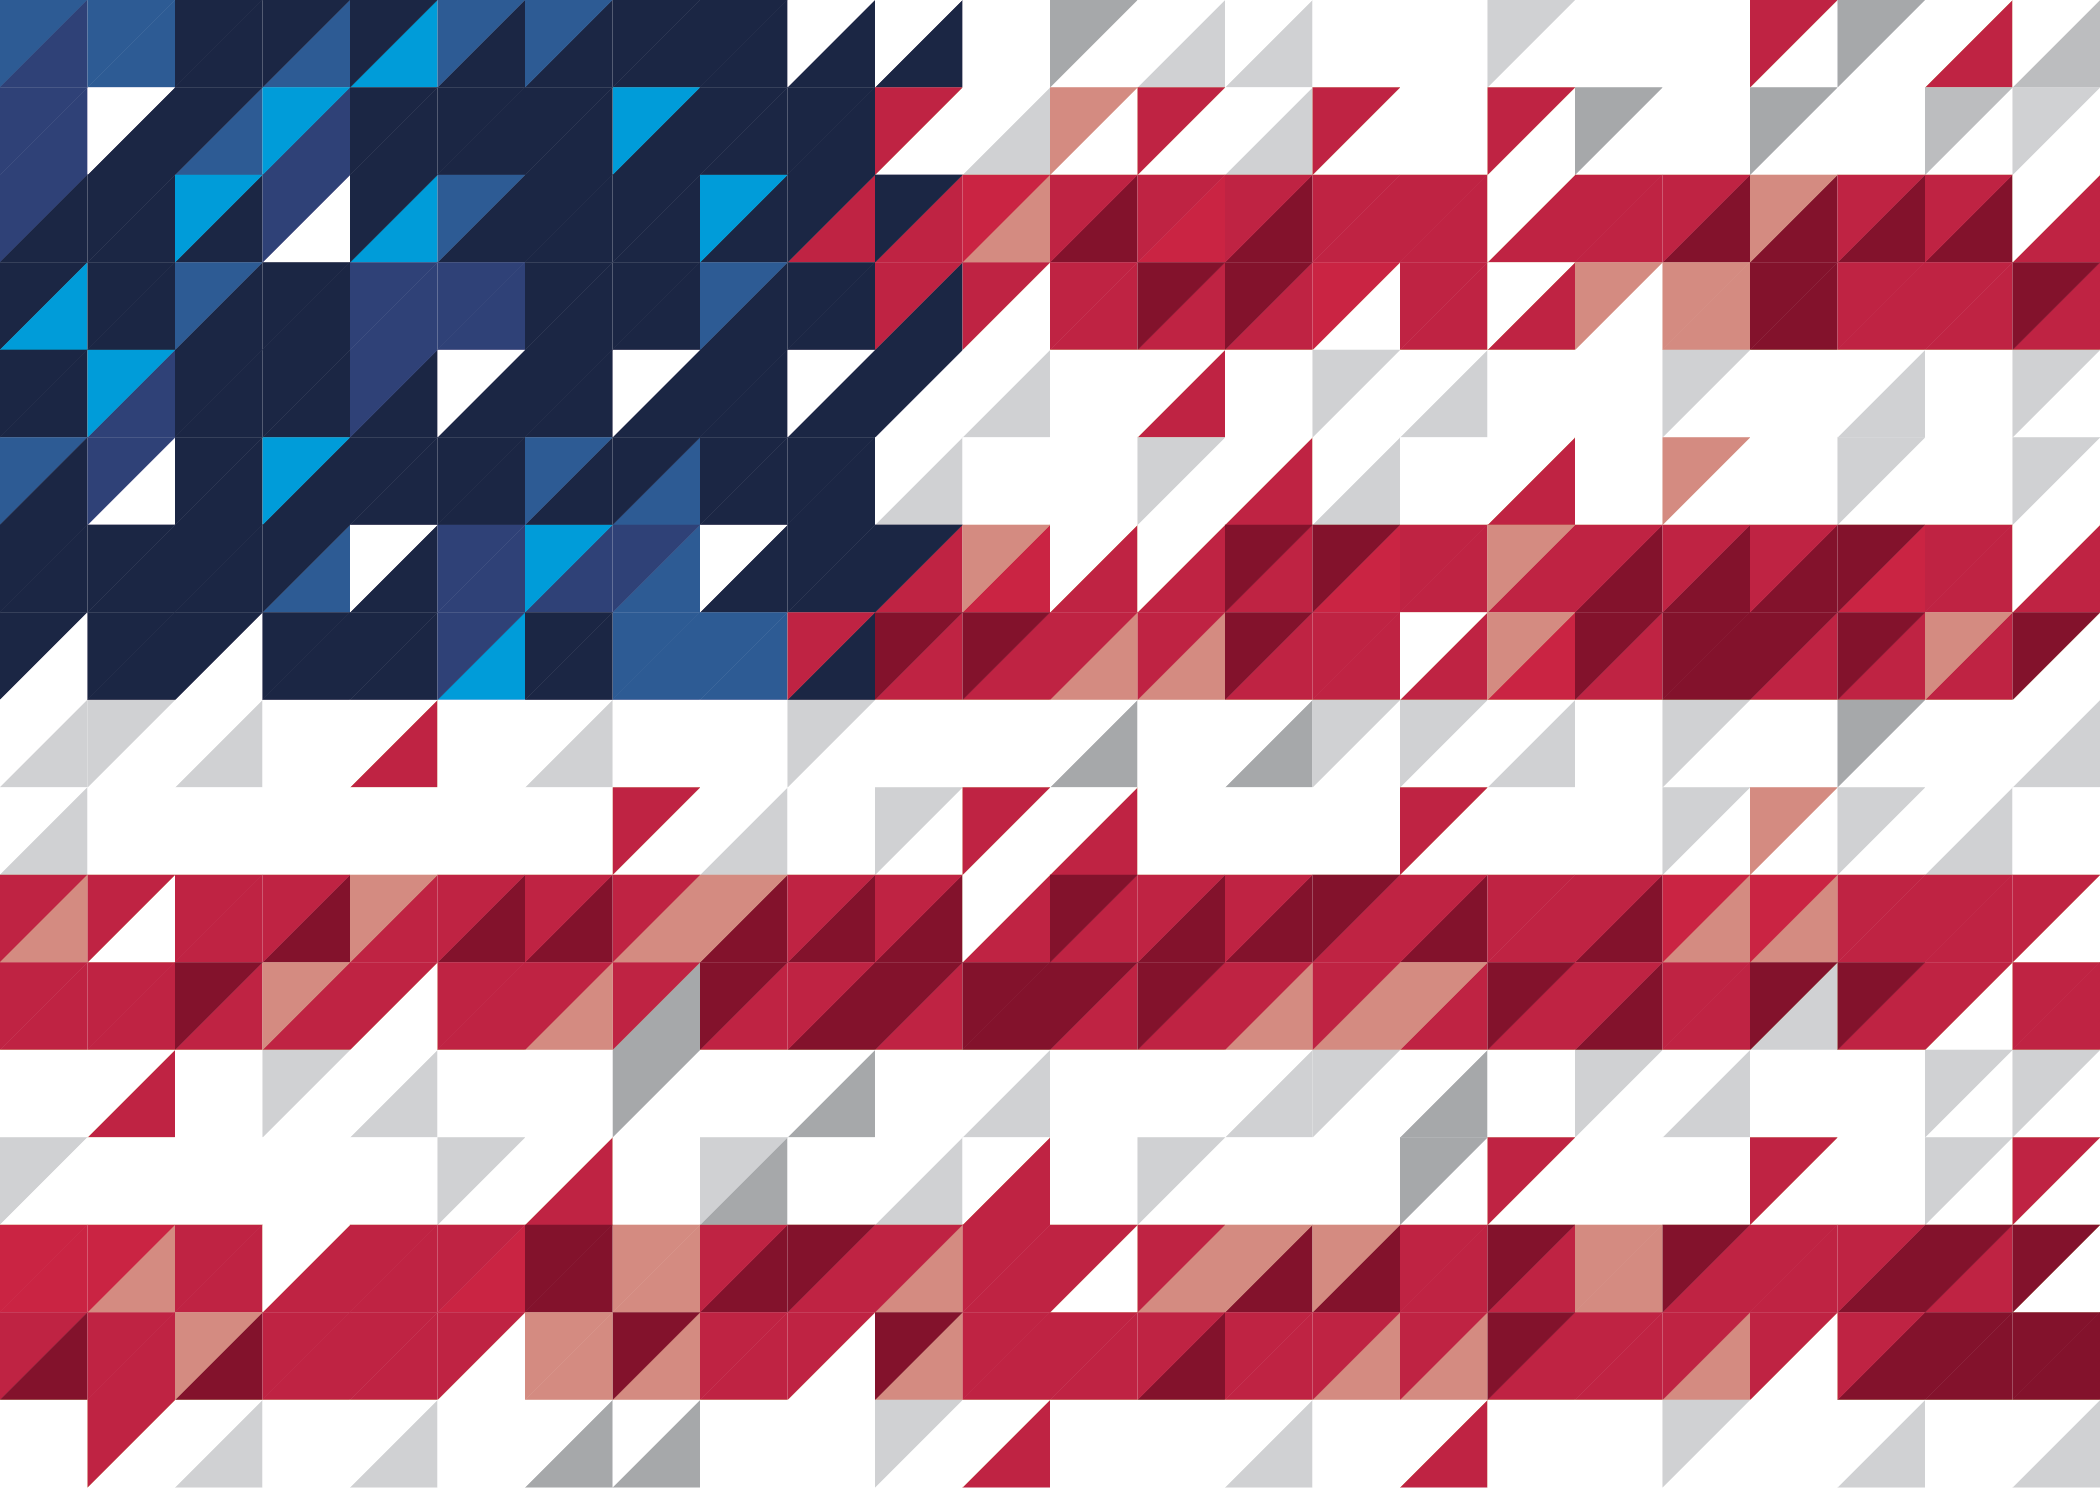 A rendering of the American flag comprised of red, white, and blue triangles.